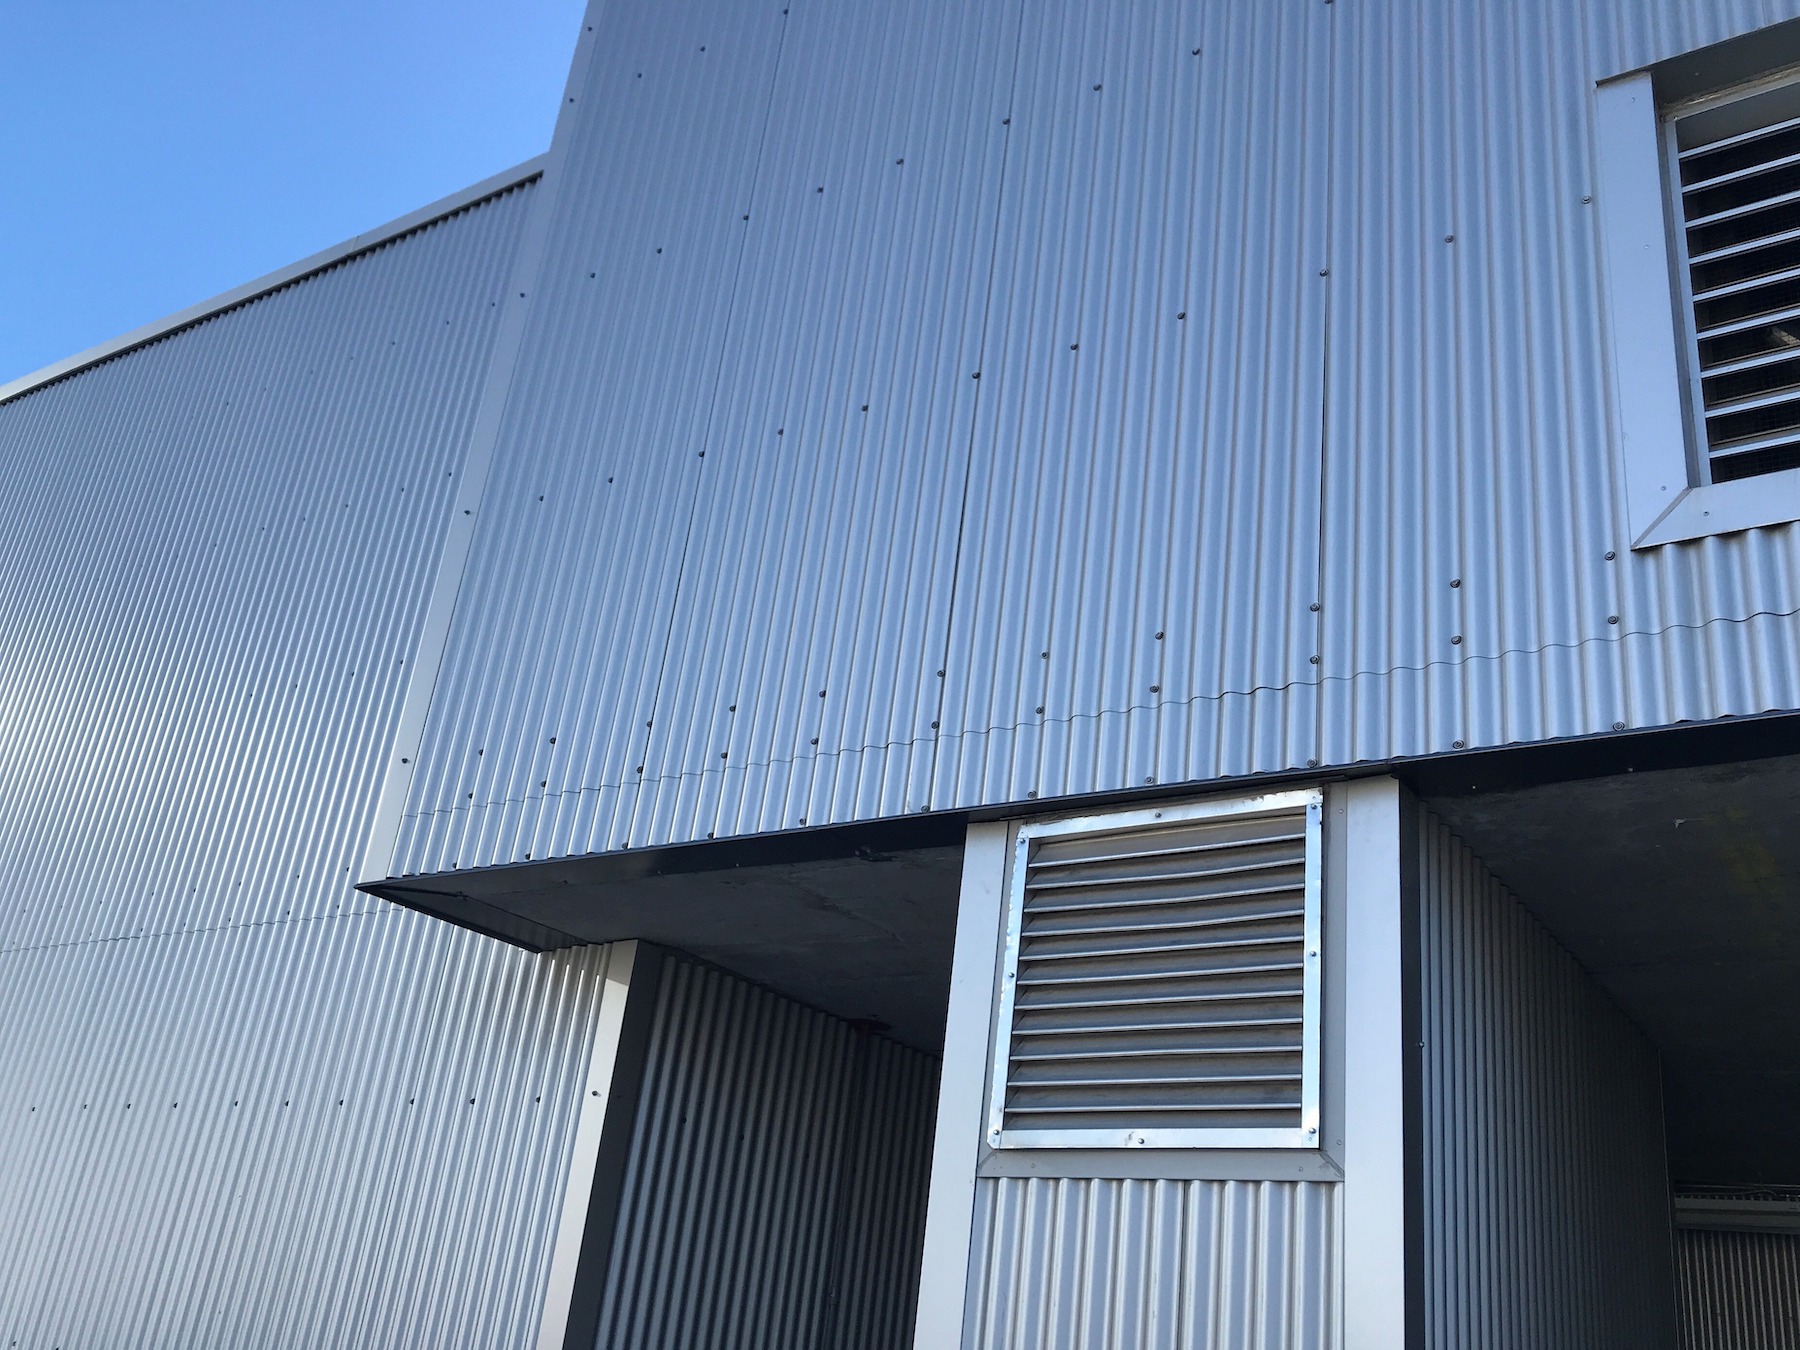 Solutions for cladding performance and supply issues